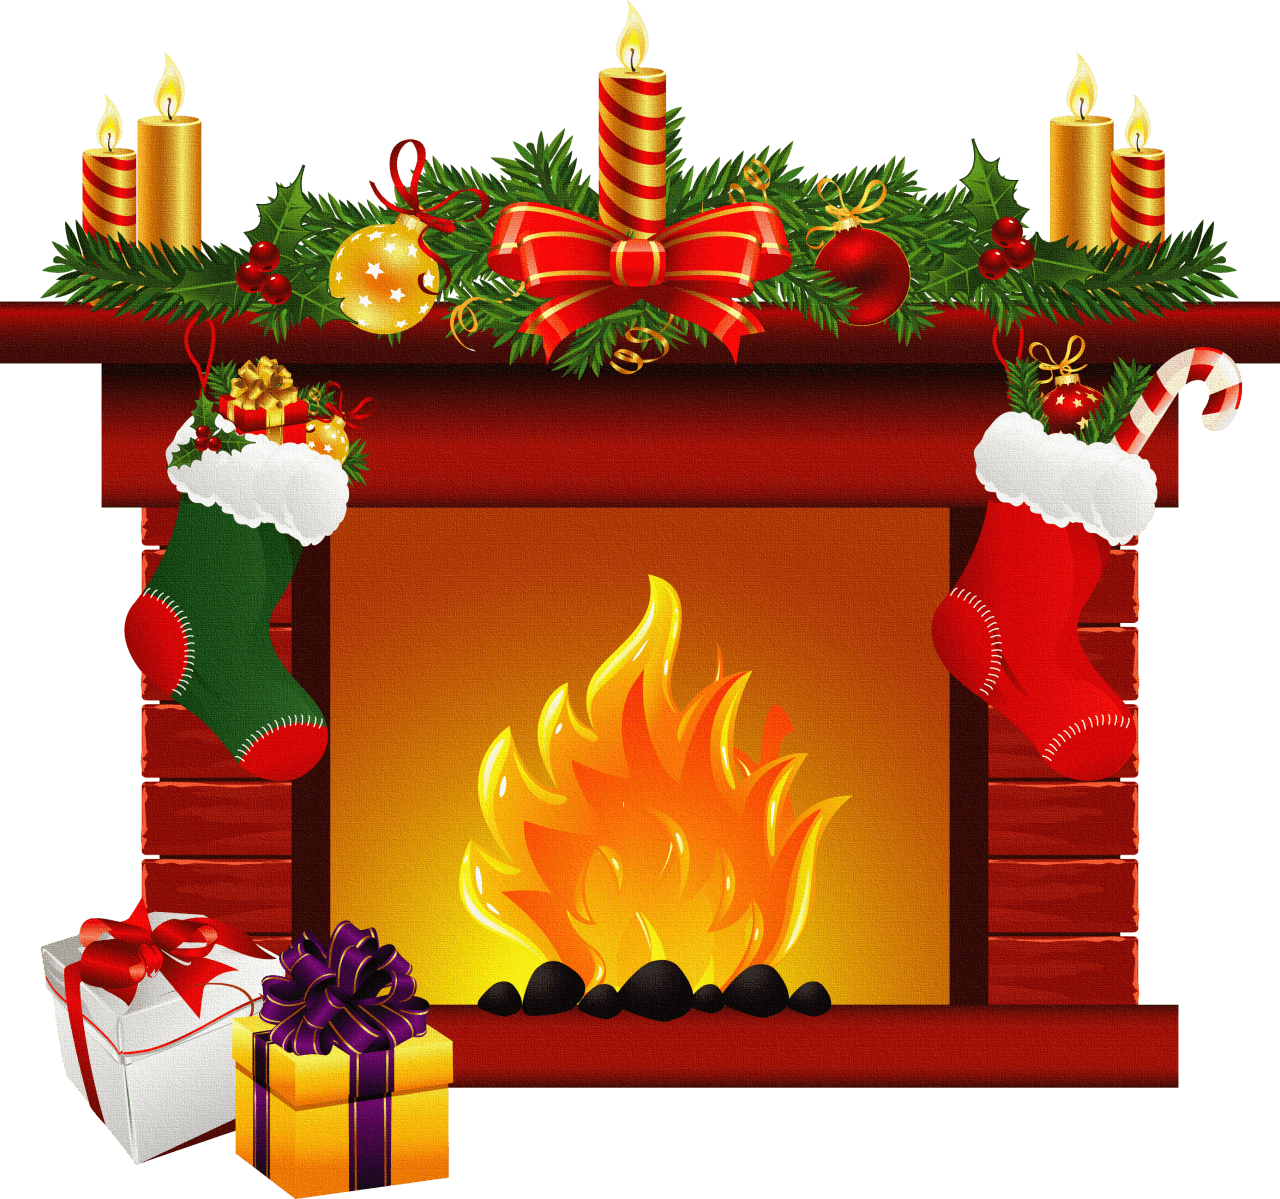 fireplace clipart holiday